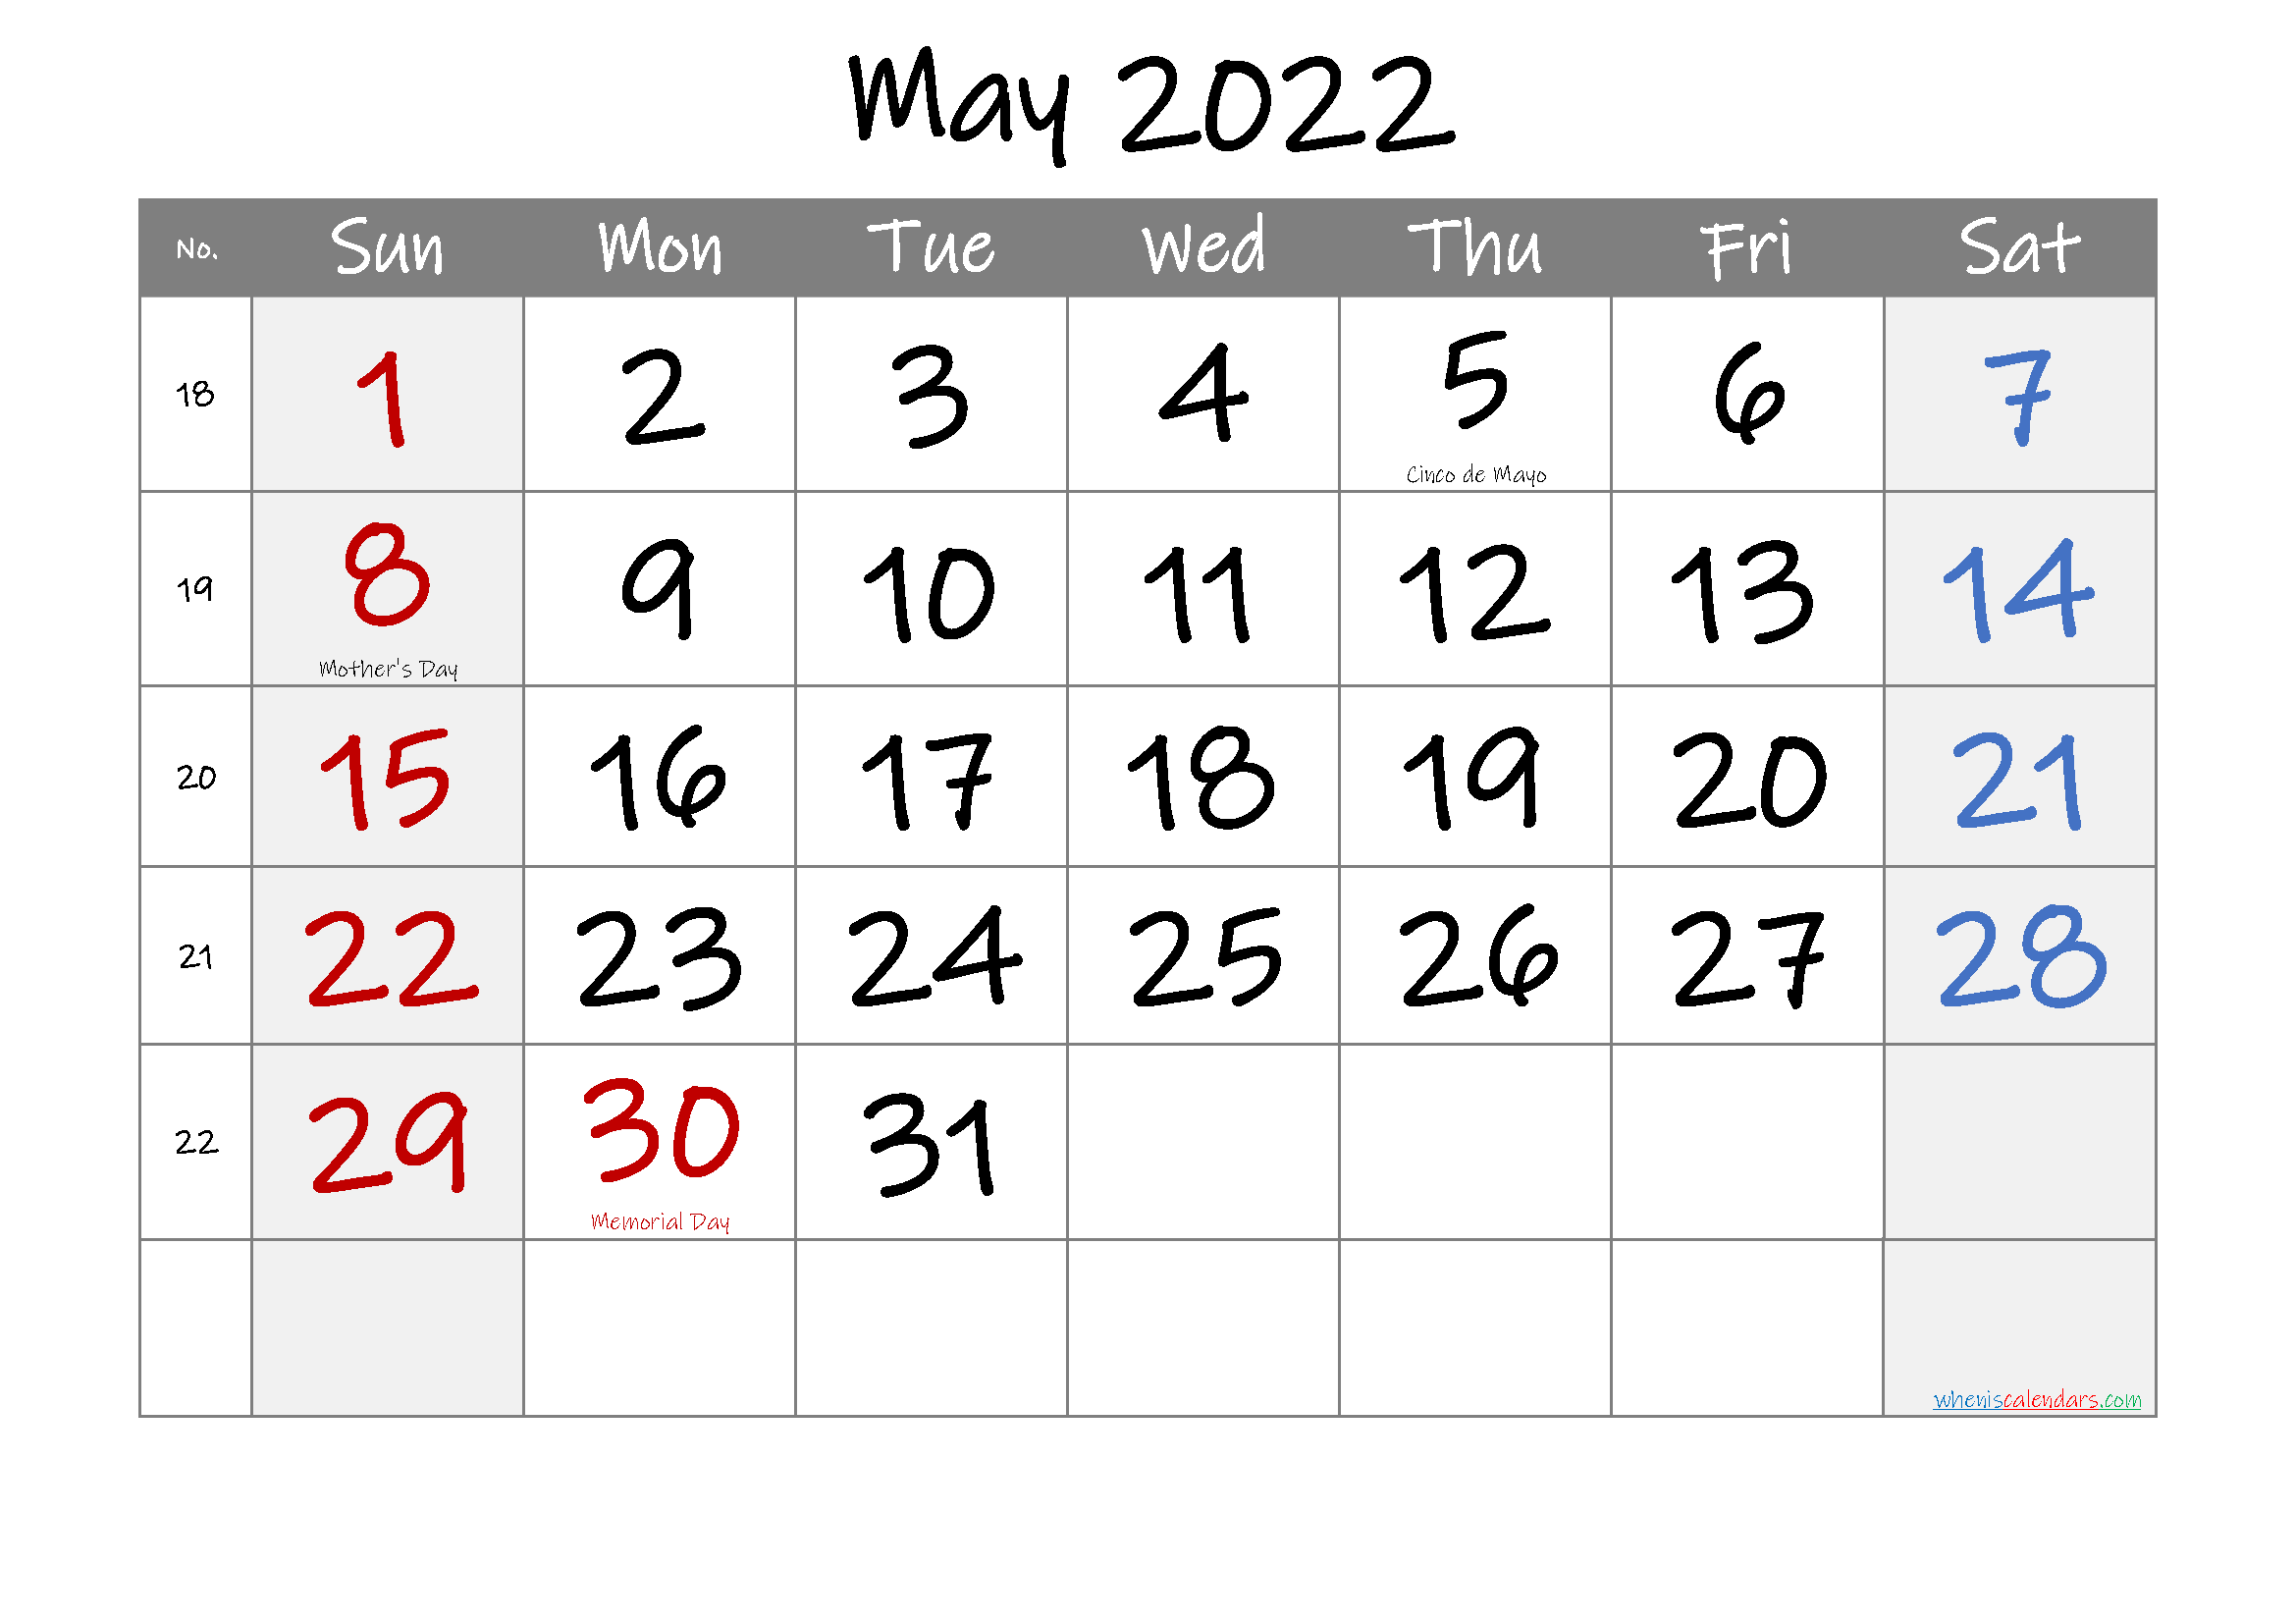 May 2022 Free Printable Calendar With HolidaysTemplate No.if22m17